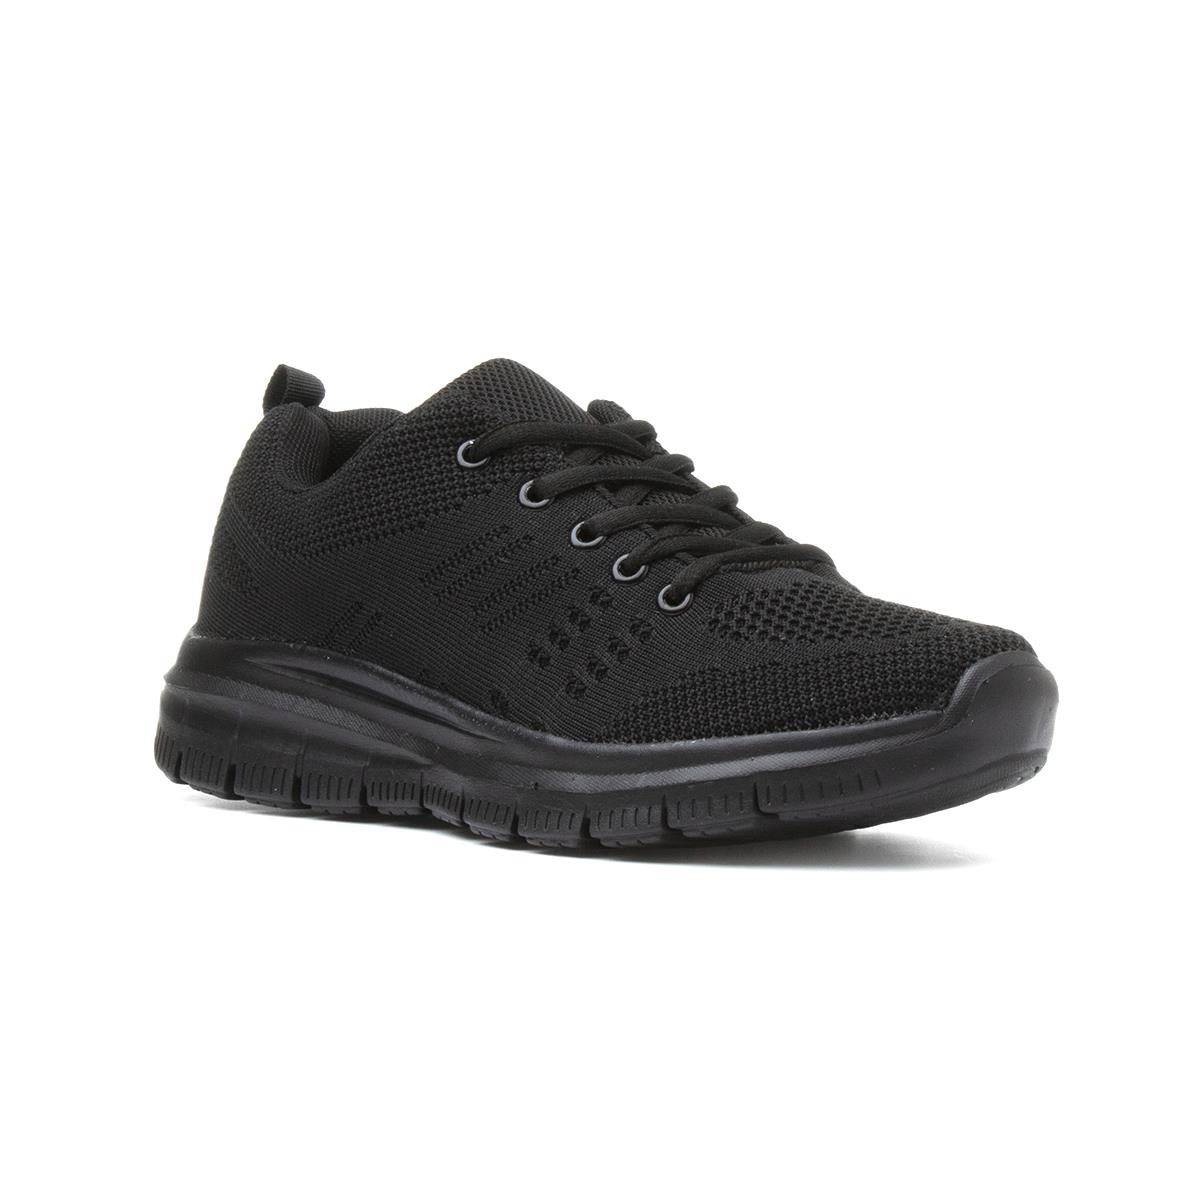 Womens Black Lace Up Flat Trainer-84072 | Shoe Zone